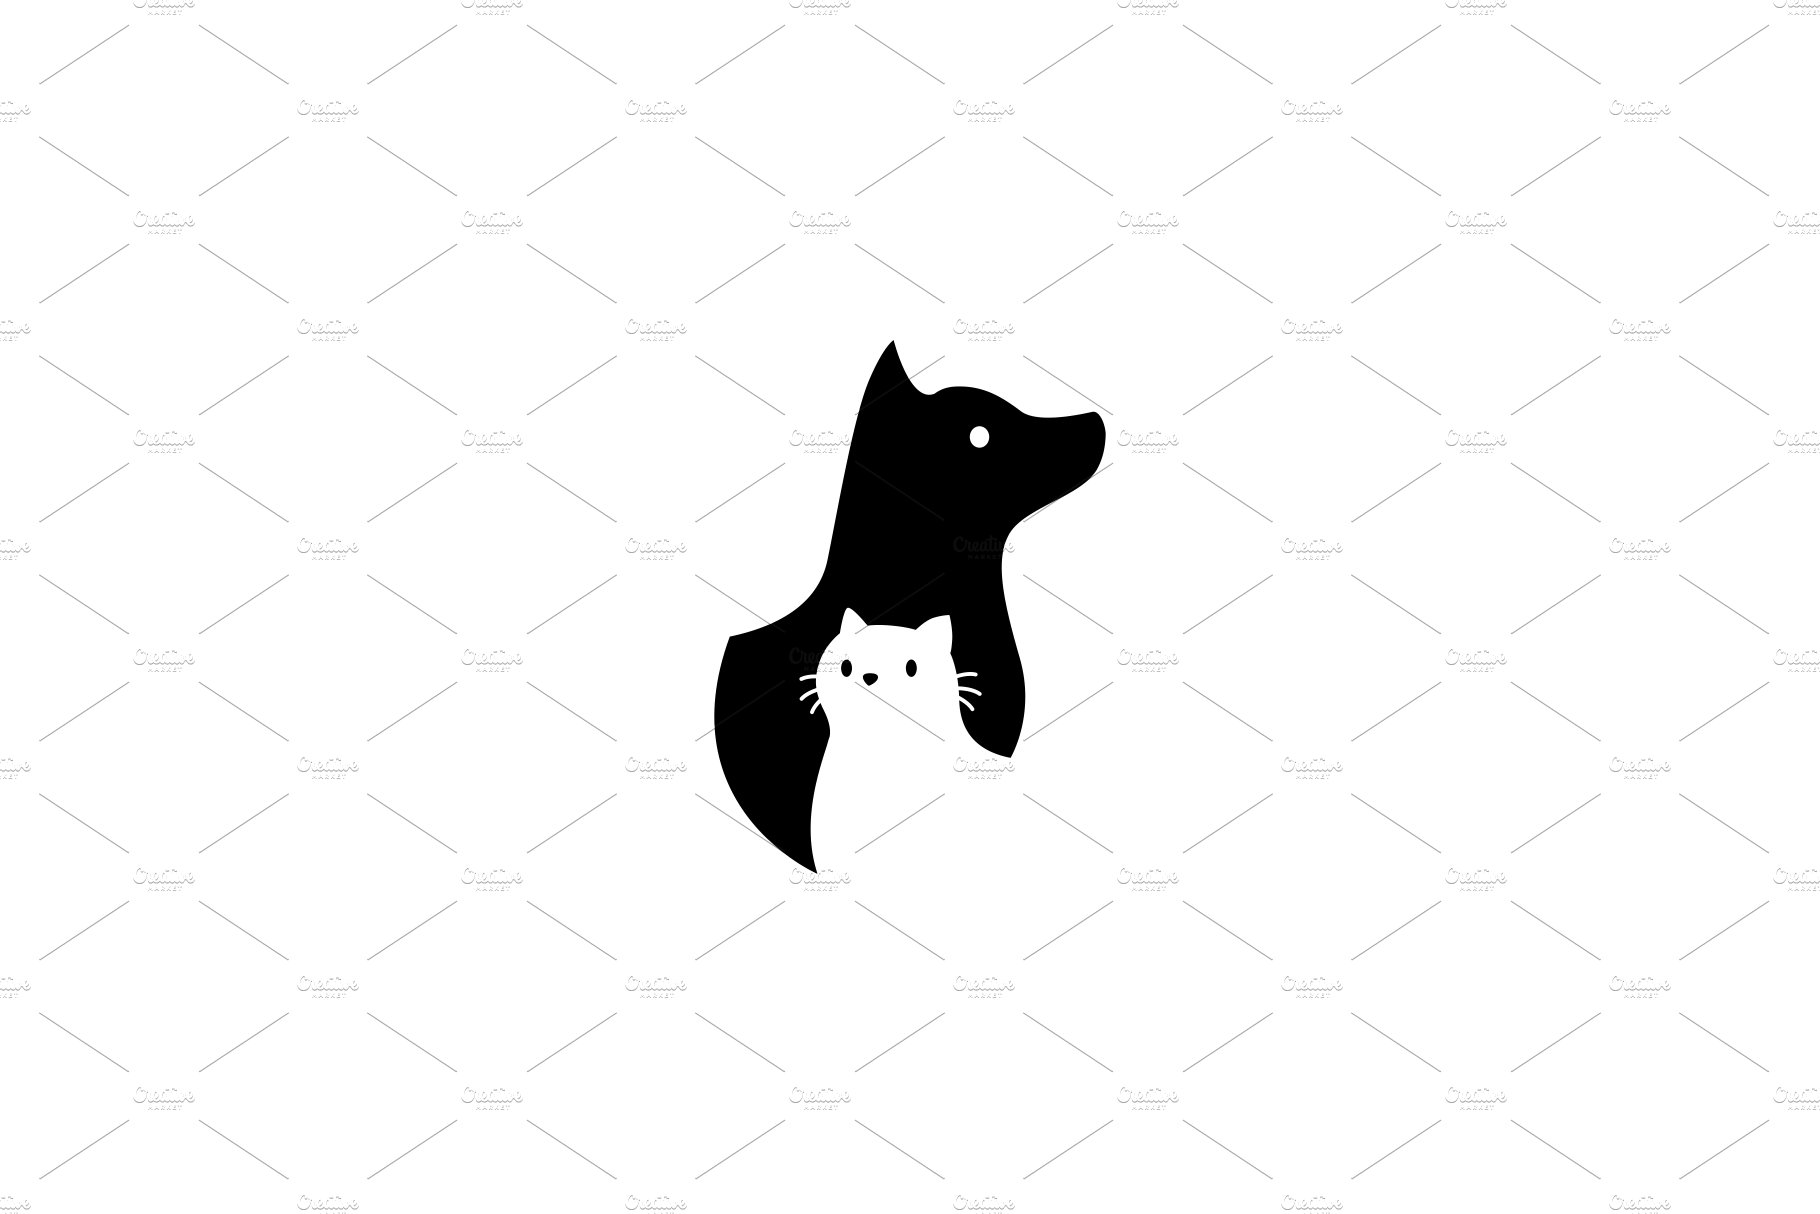 dog and cat on negative space logo cover image.